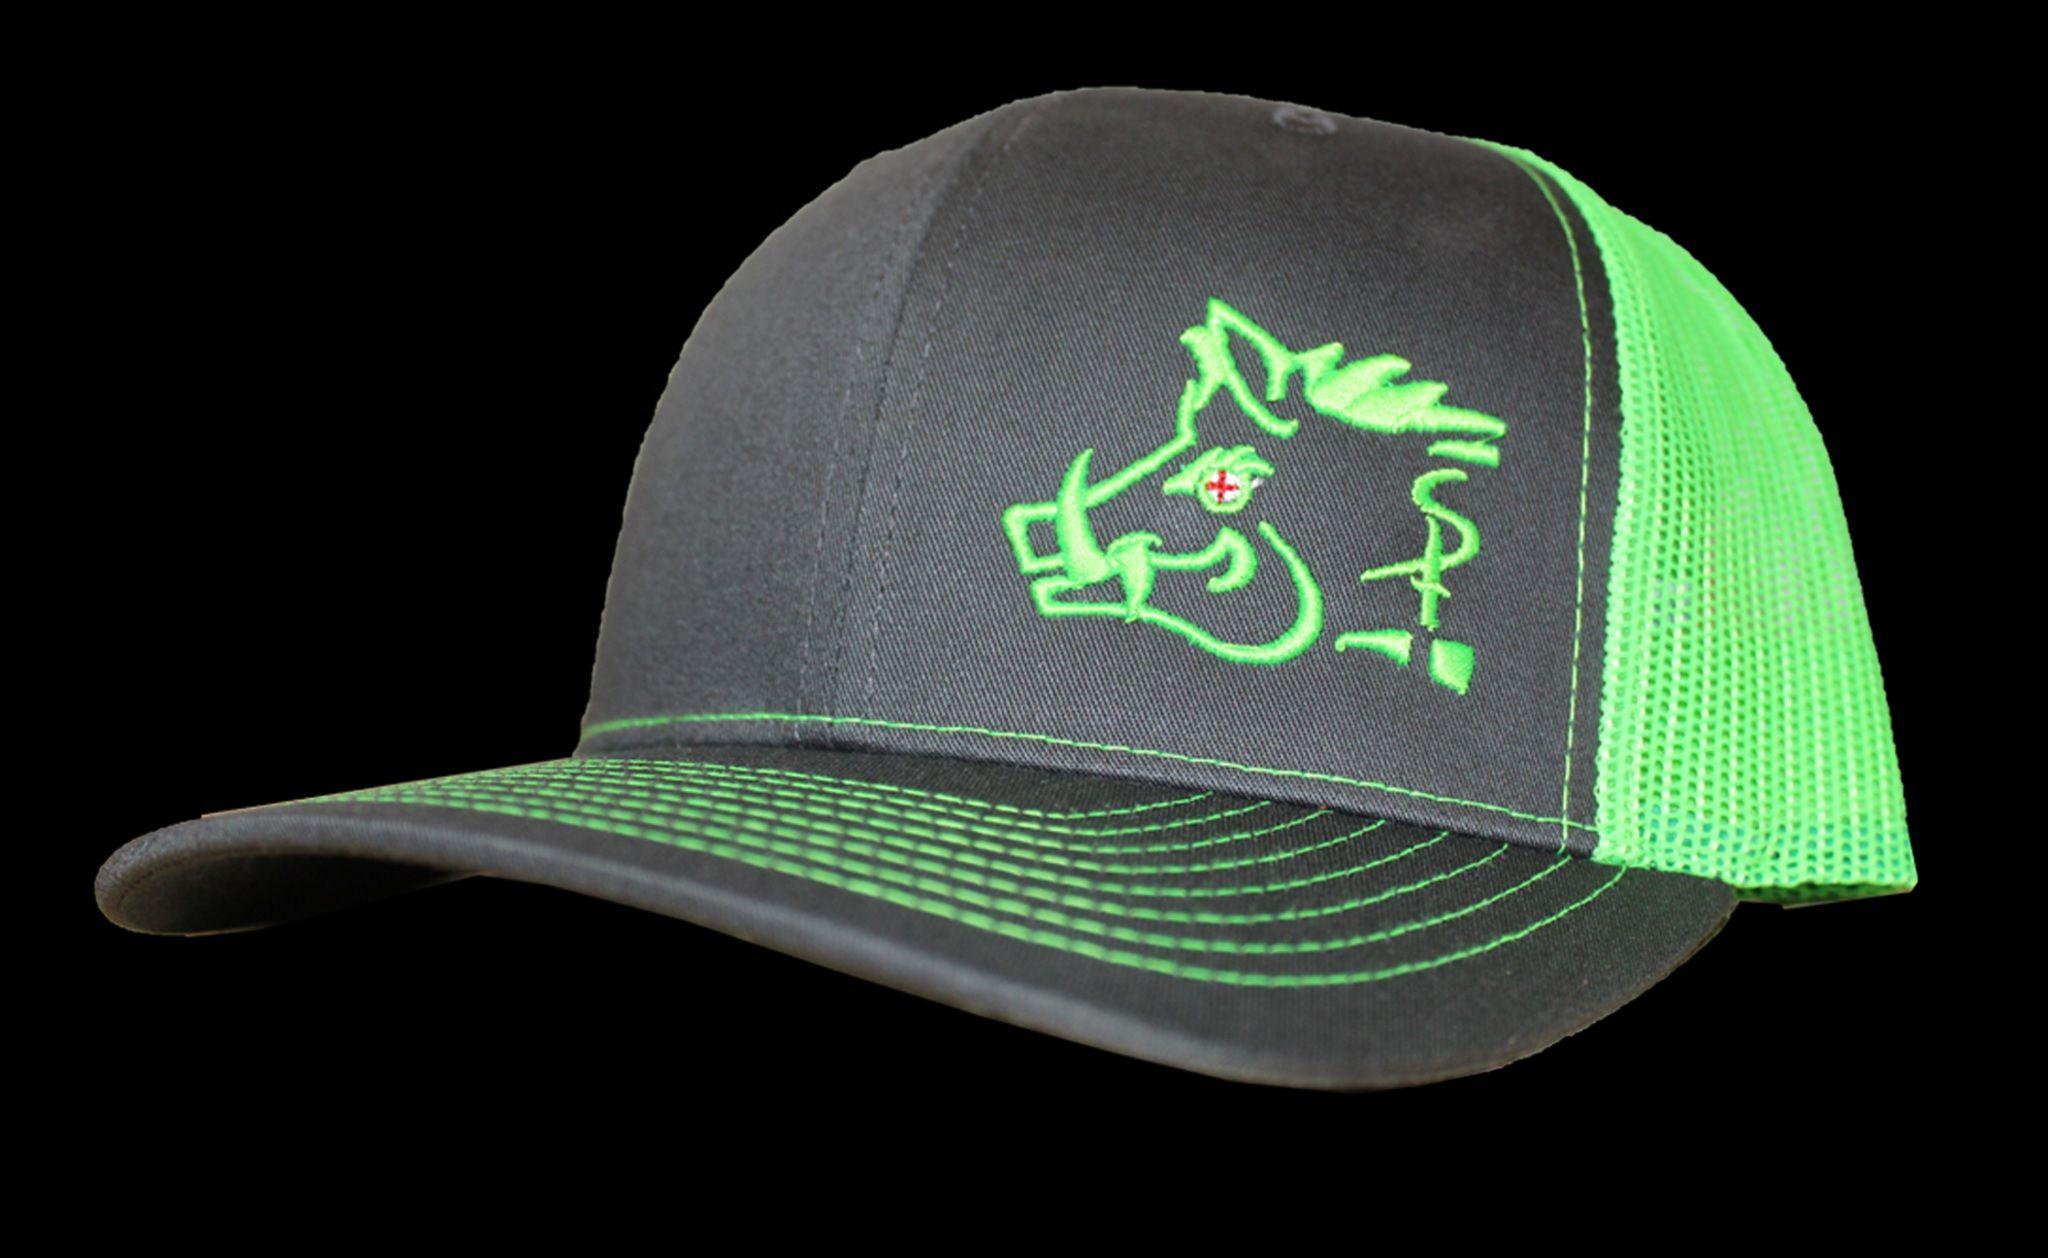 Grey and Green Ball Logo - Grey & Lime Green Sniper Pig Ball Cap by Oil Field